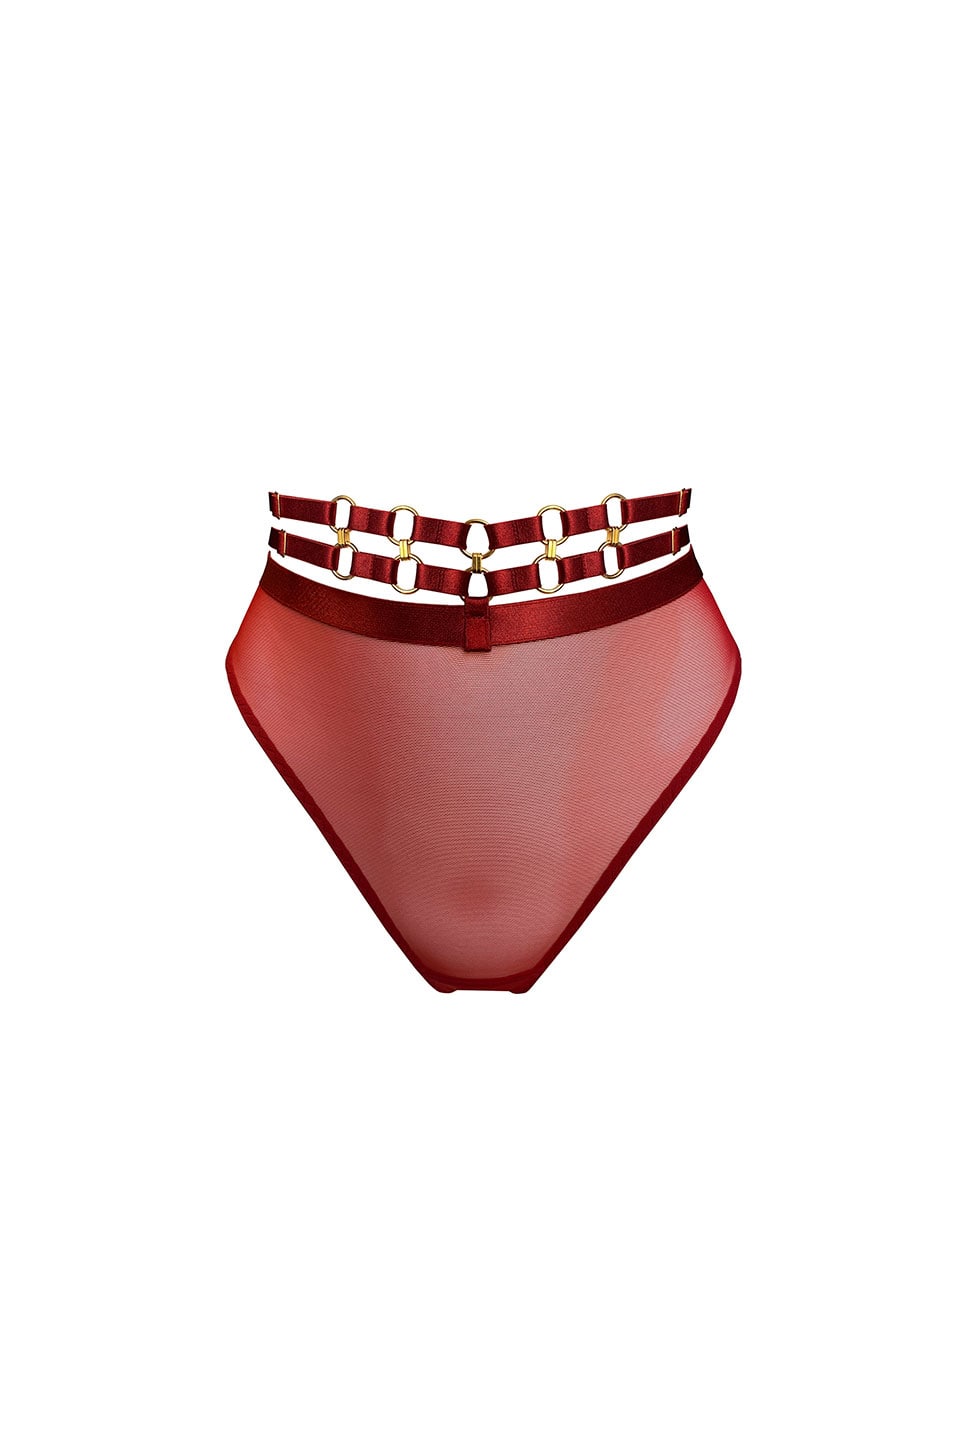 Thumbnail for Product gallery 1, Kleio High Waist Thong Burnt Red